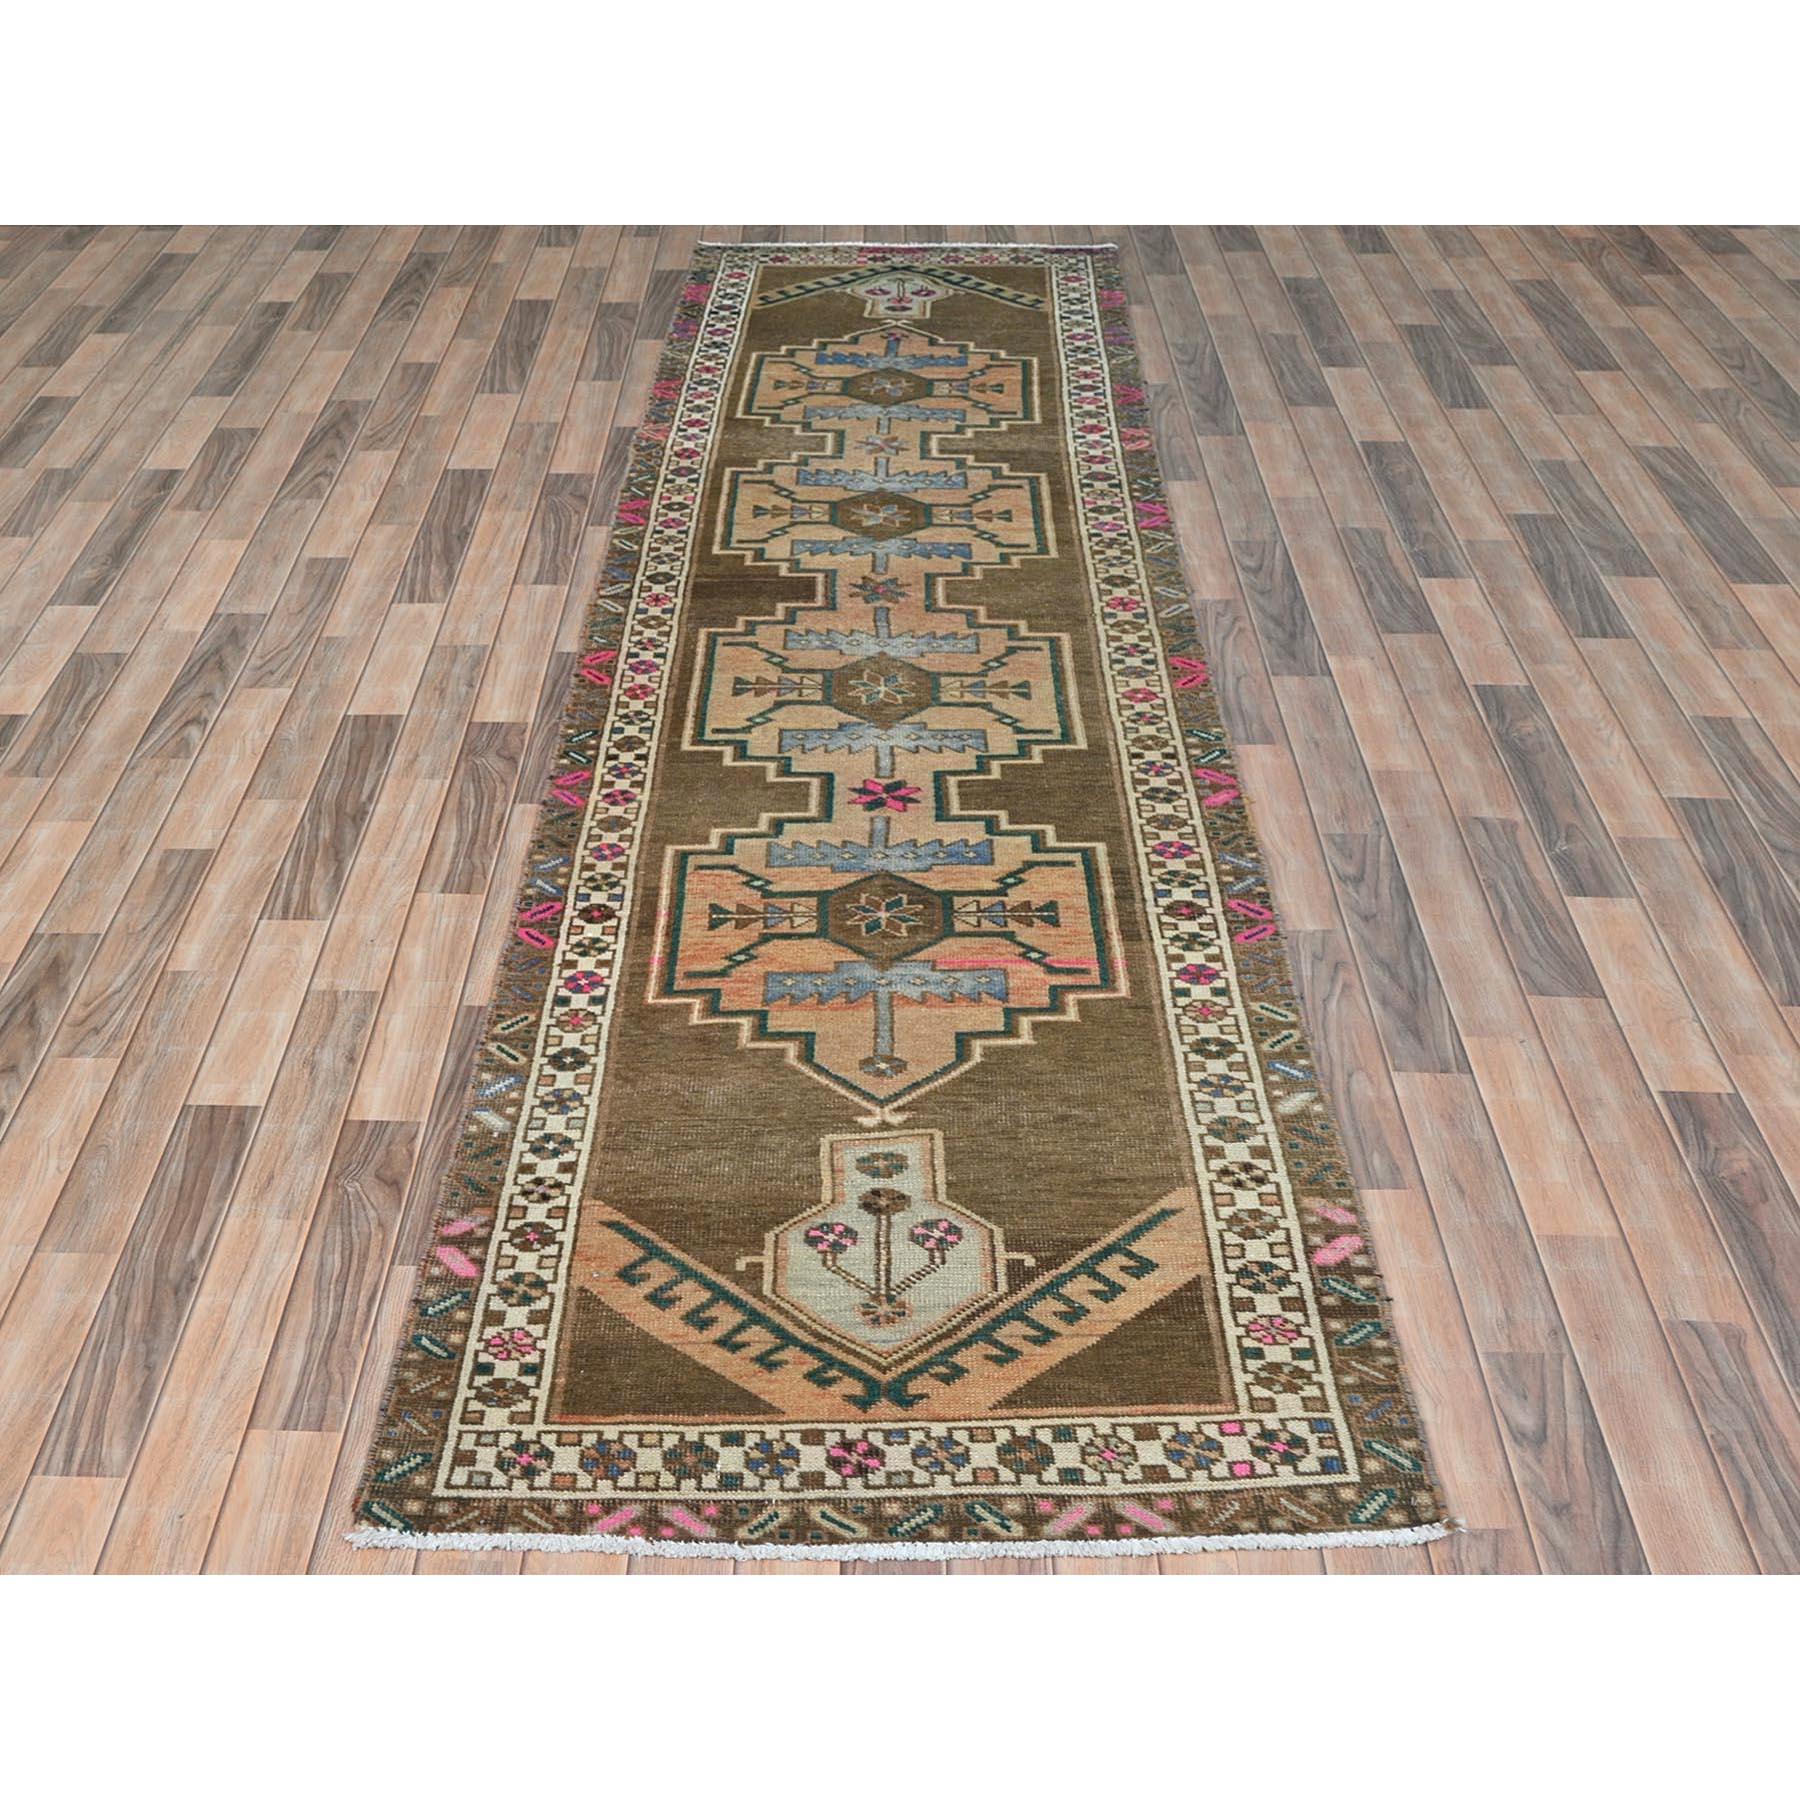 This fabulous Hand-Knotted carpet has been created and designed for extra strength and durability. This rug has been handcrafted for weeks in the traditional method that is used to make
Exact Rug Size in Feet and Inches : 3'3